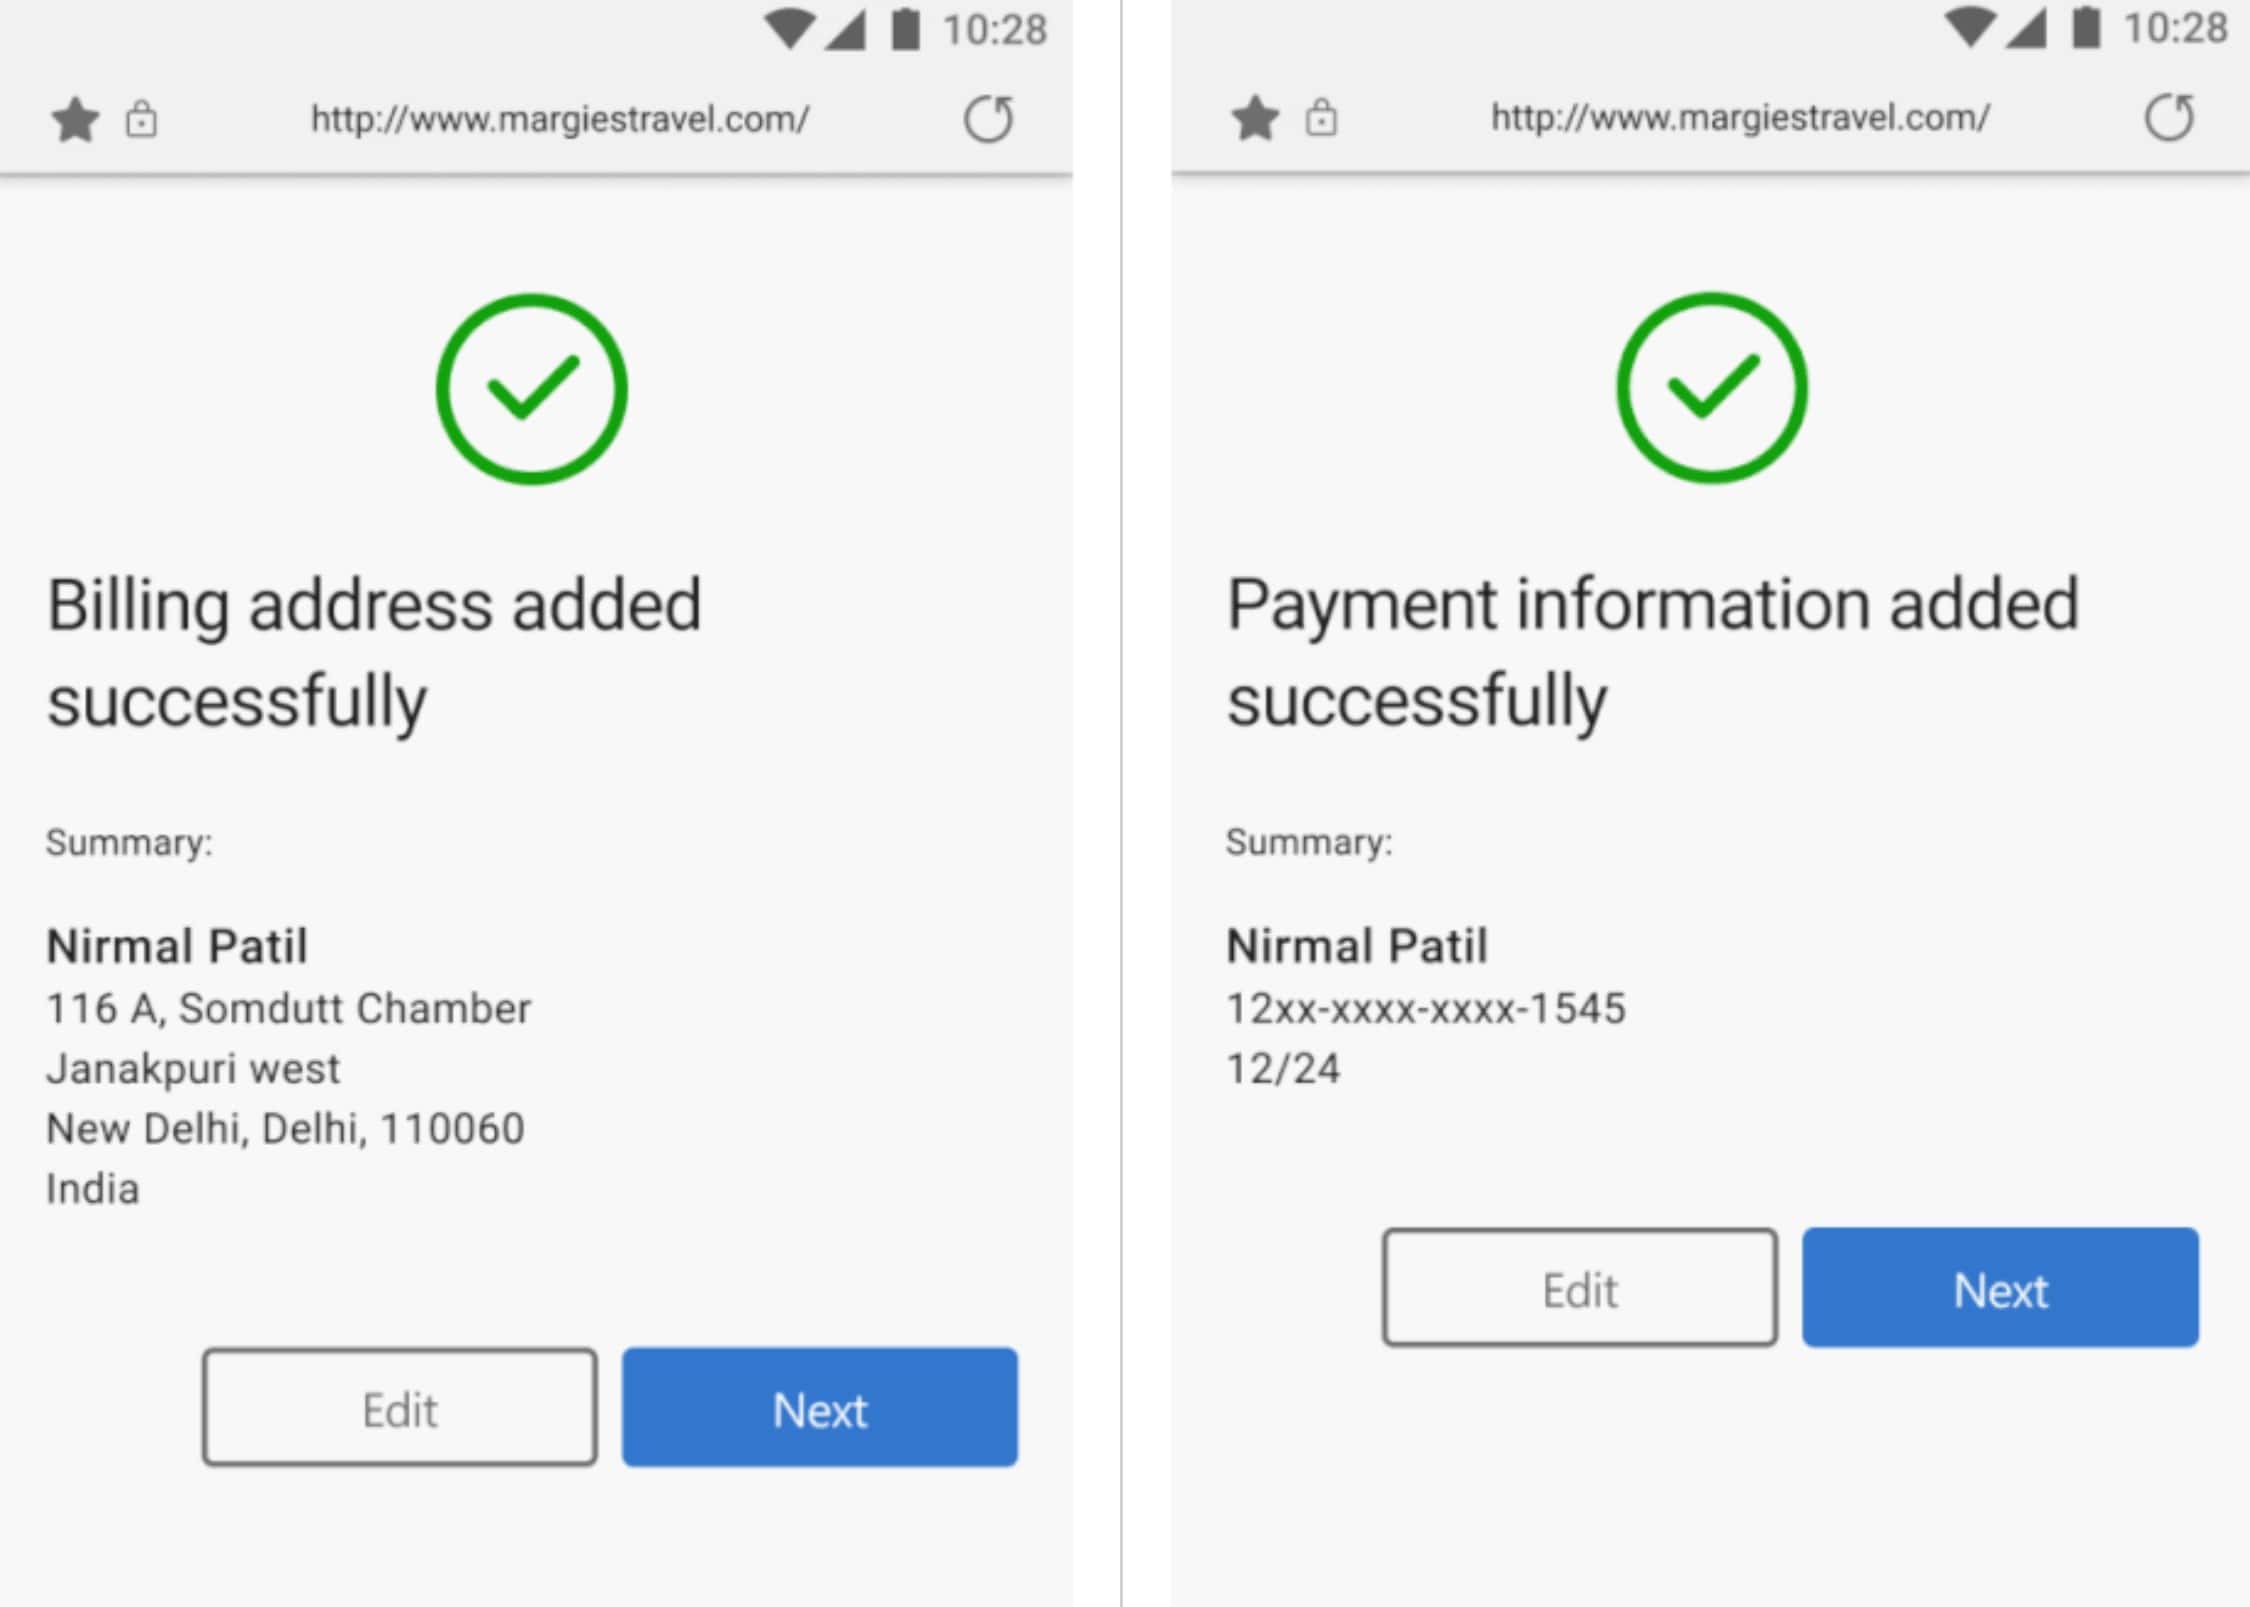 Microsoft Authenticator app now supports autofill of addresses and payment